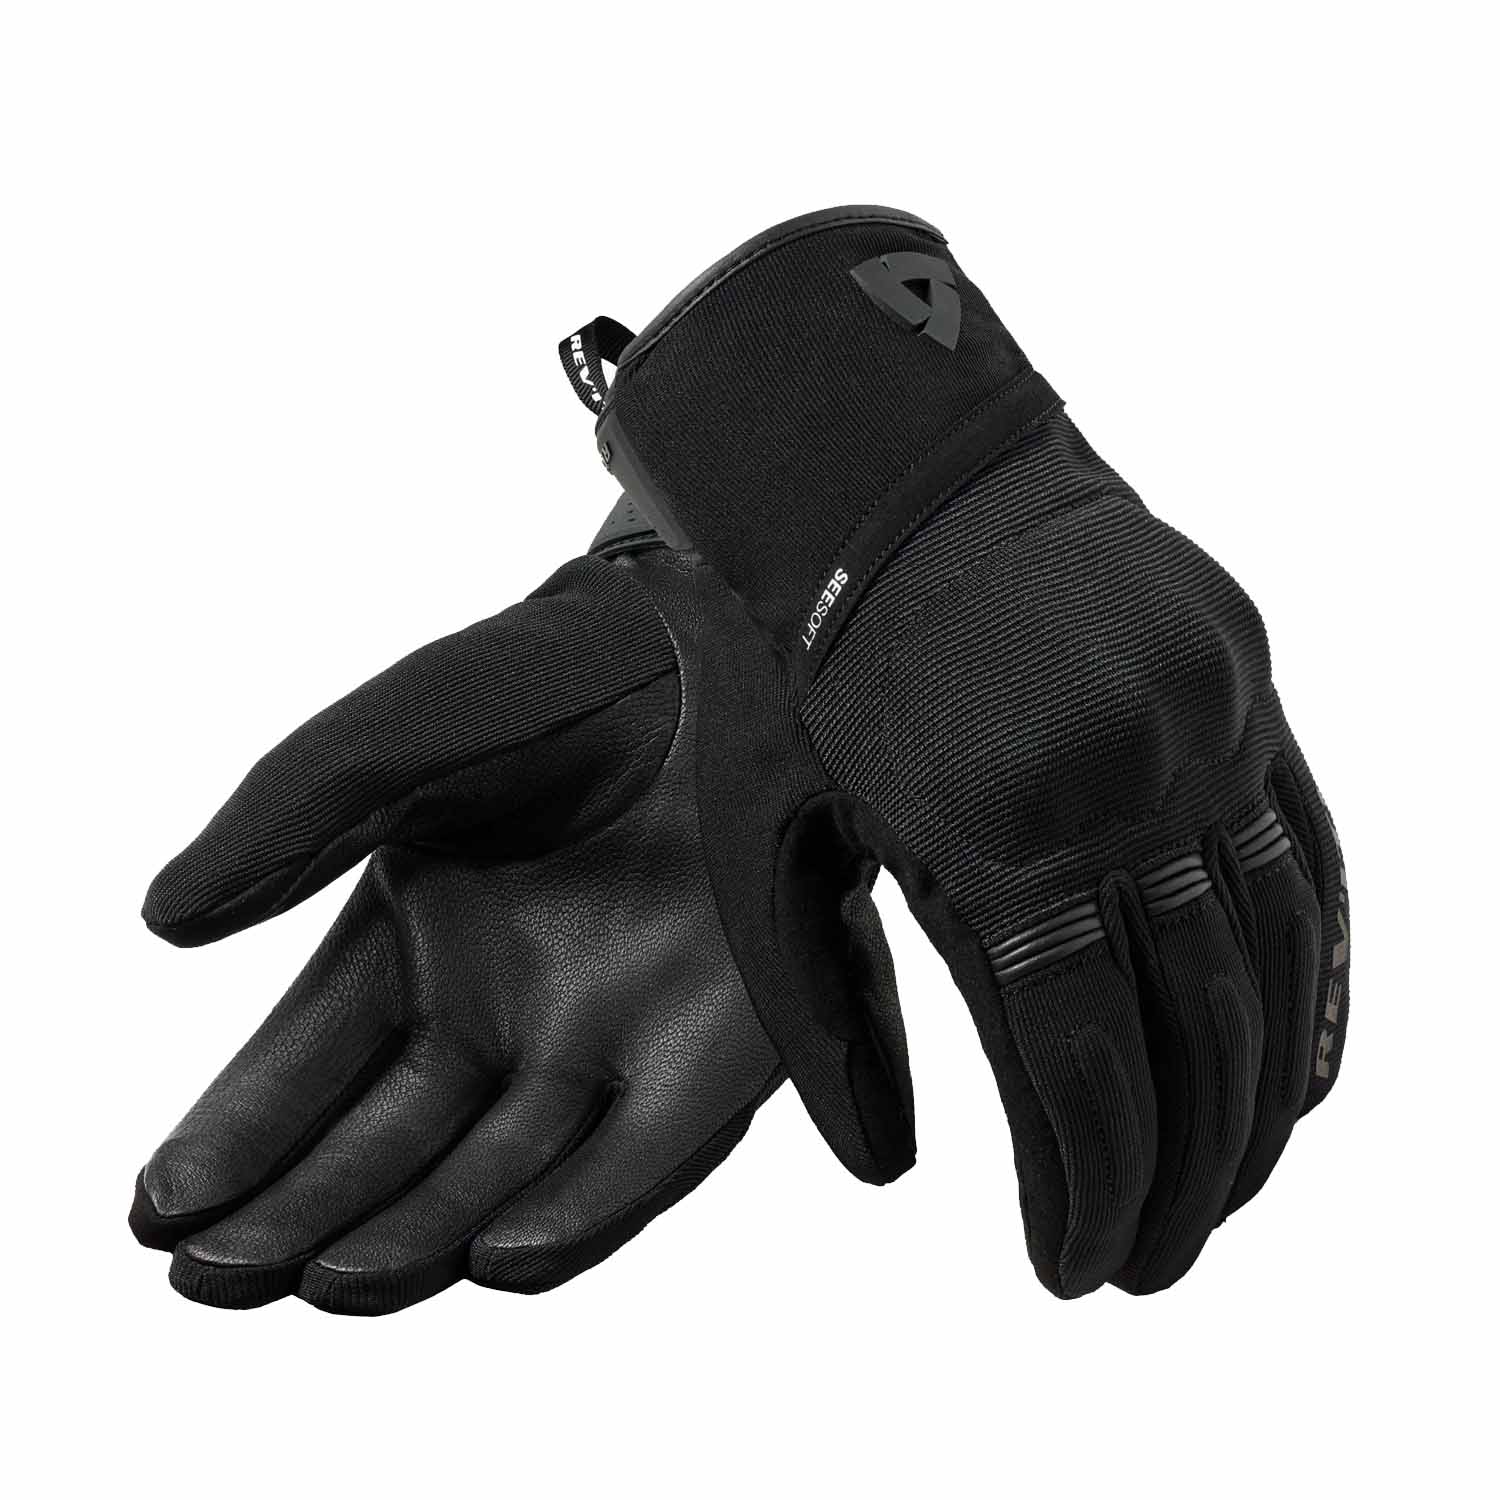 Image of REV'IT! Mosca 2 H2O Gloves Black Size 4XL ID 8700001383301